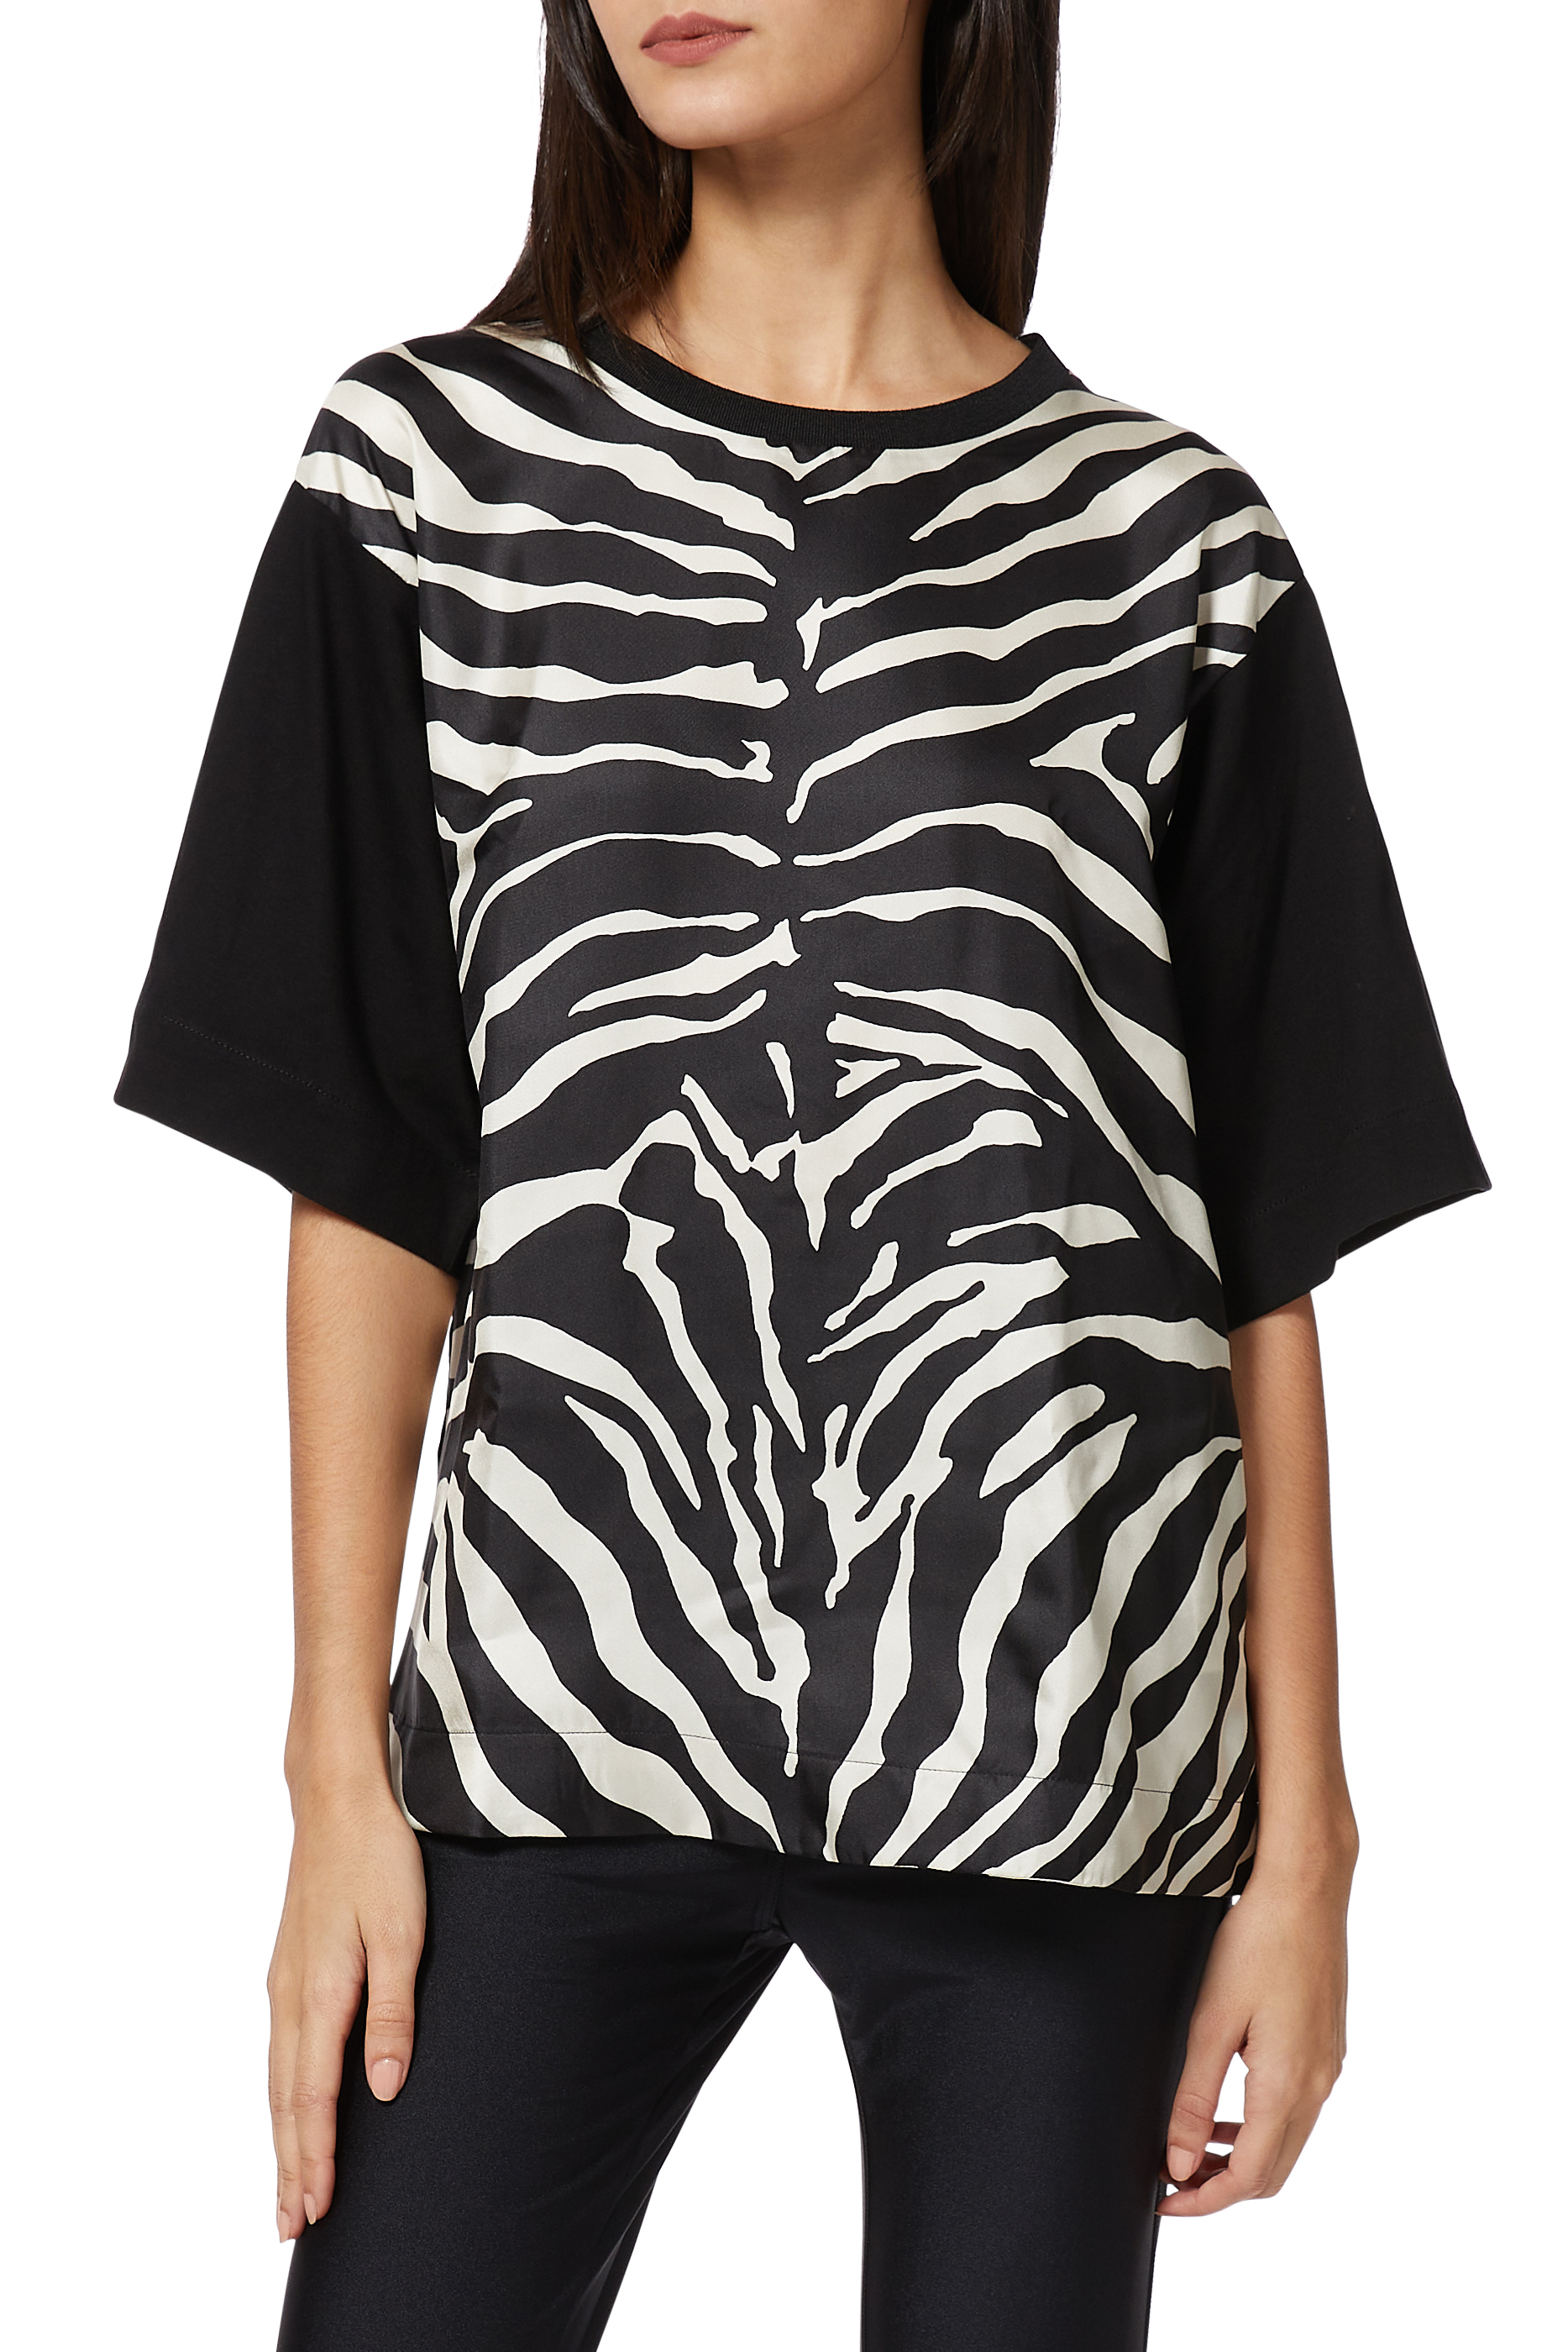 Buy Moncler Zebra Print T-Shirt - Womens for AED 1870.00 Tops ...